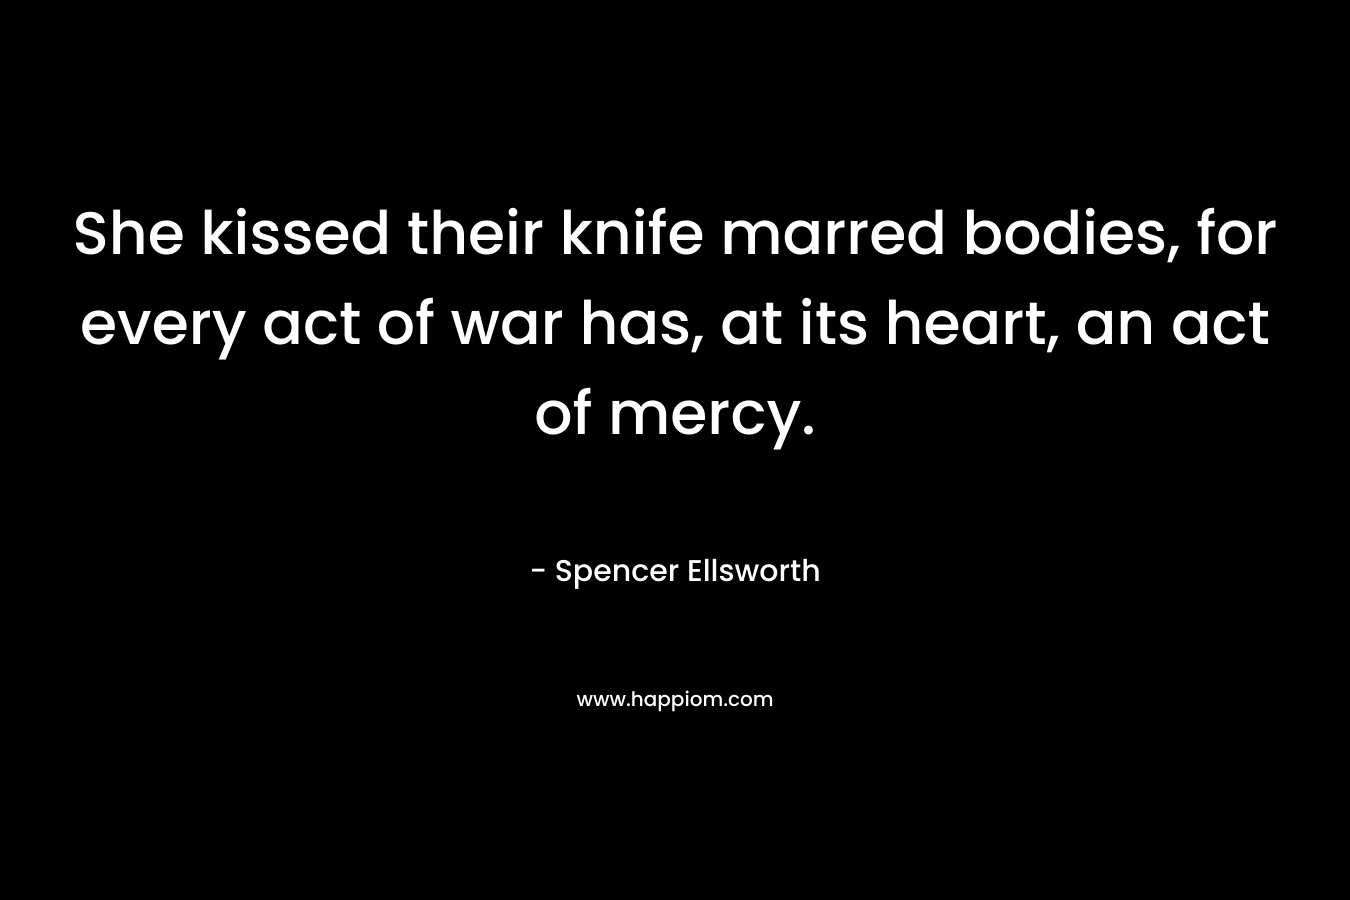 She kissed their knife marred bodies, for every act of war has, at its heart, an act of mercy.